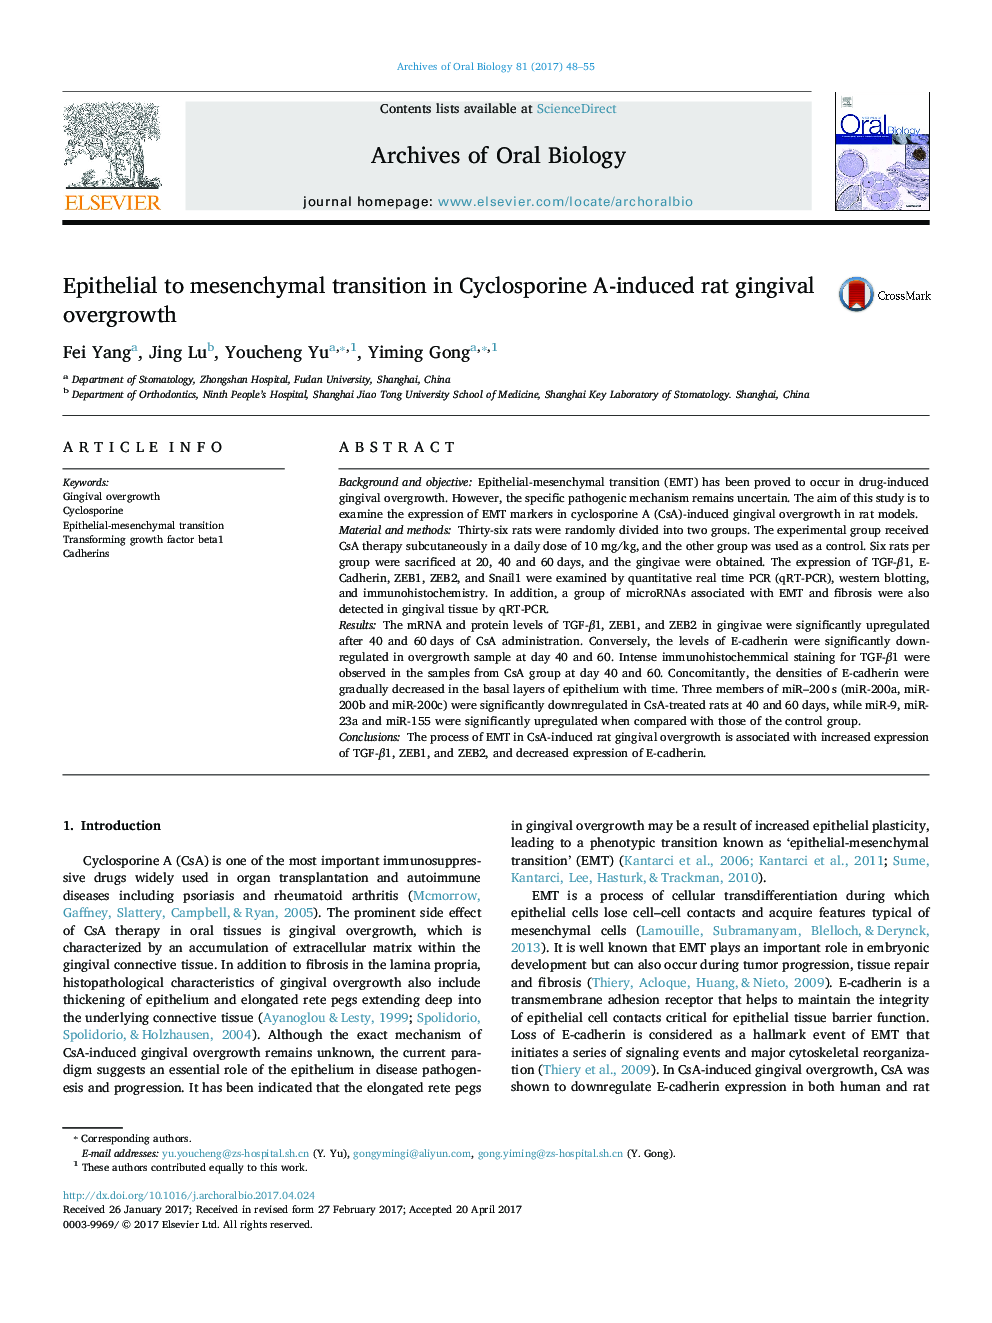 Epithelial to mesenchymal transition in Cyclosporine A-induced rat gingival overgrowth